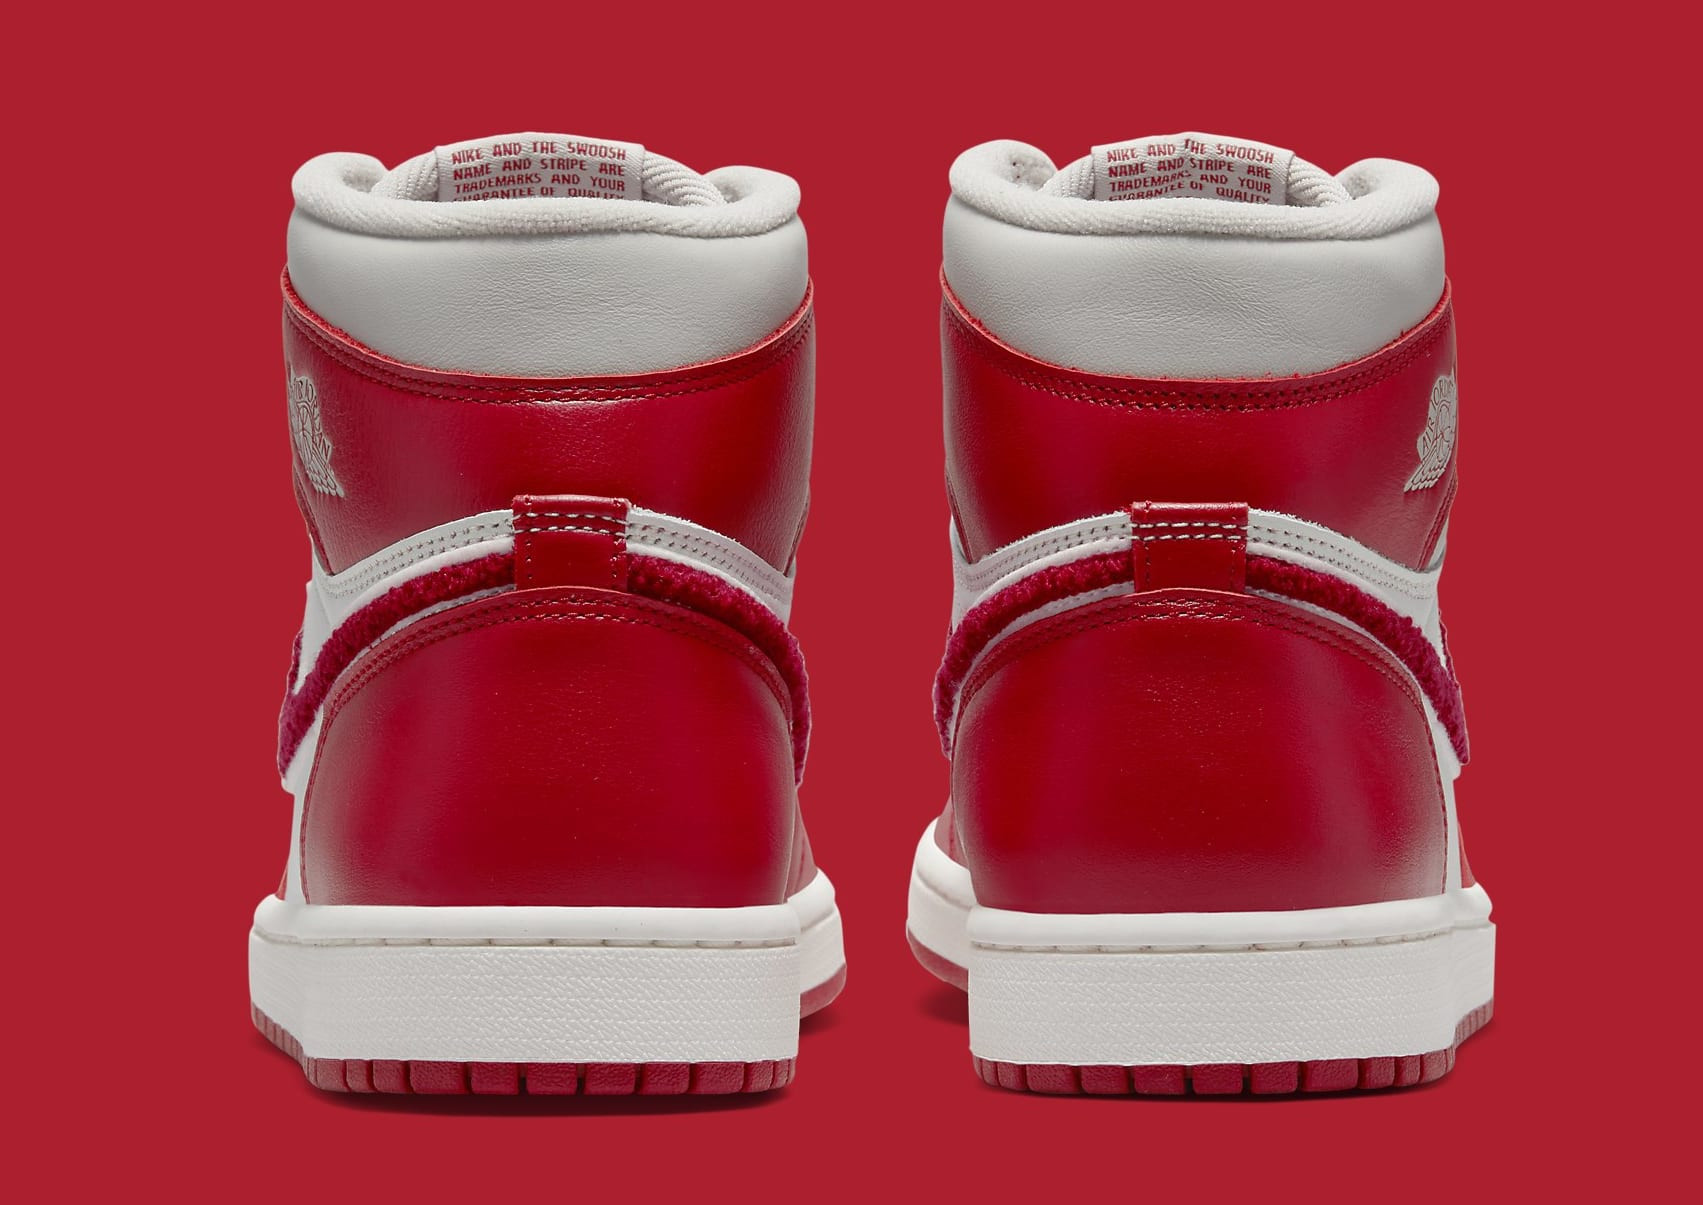 The 'Chenille' Air Jordan 1 Releases This Month